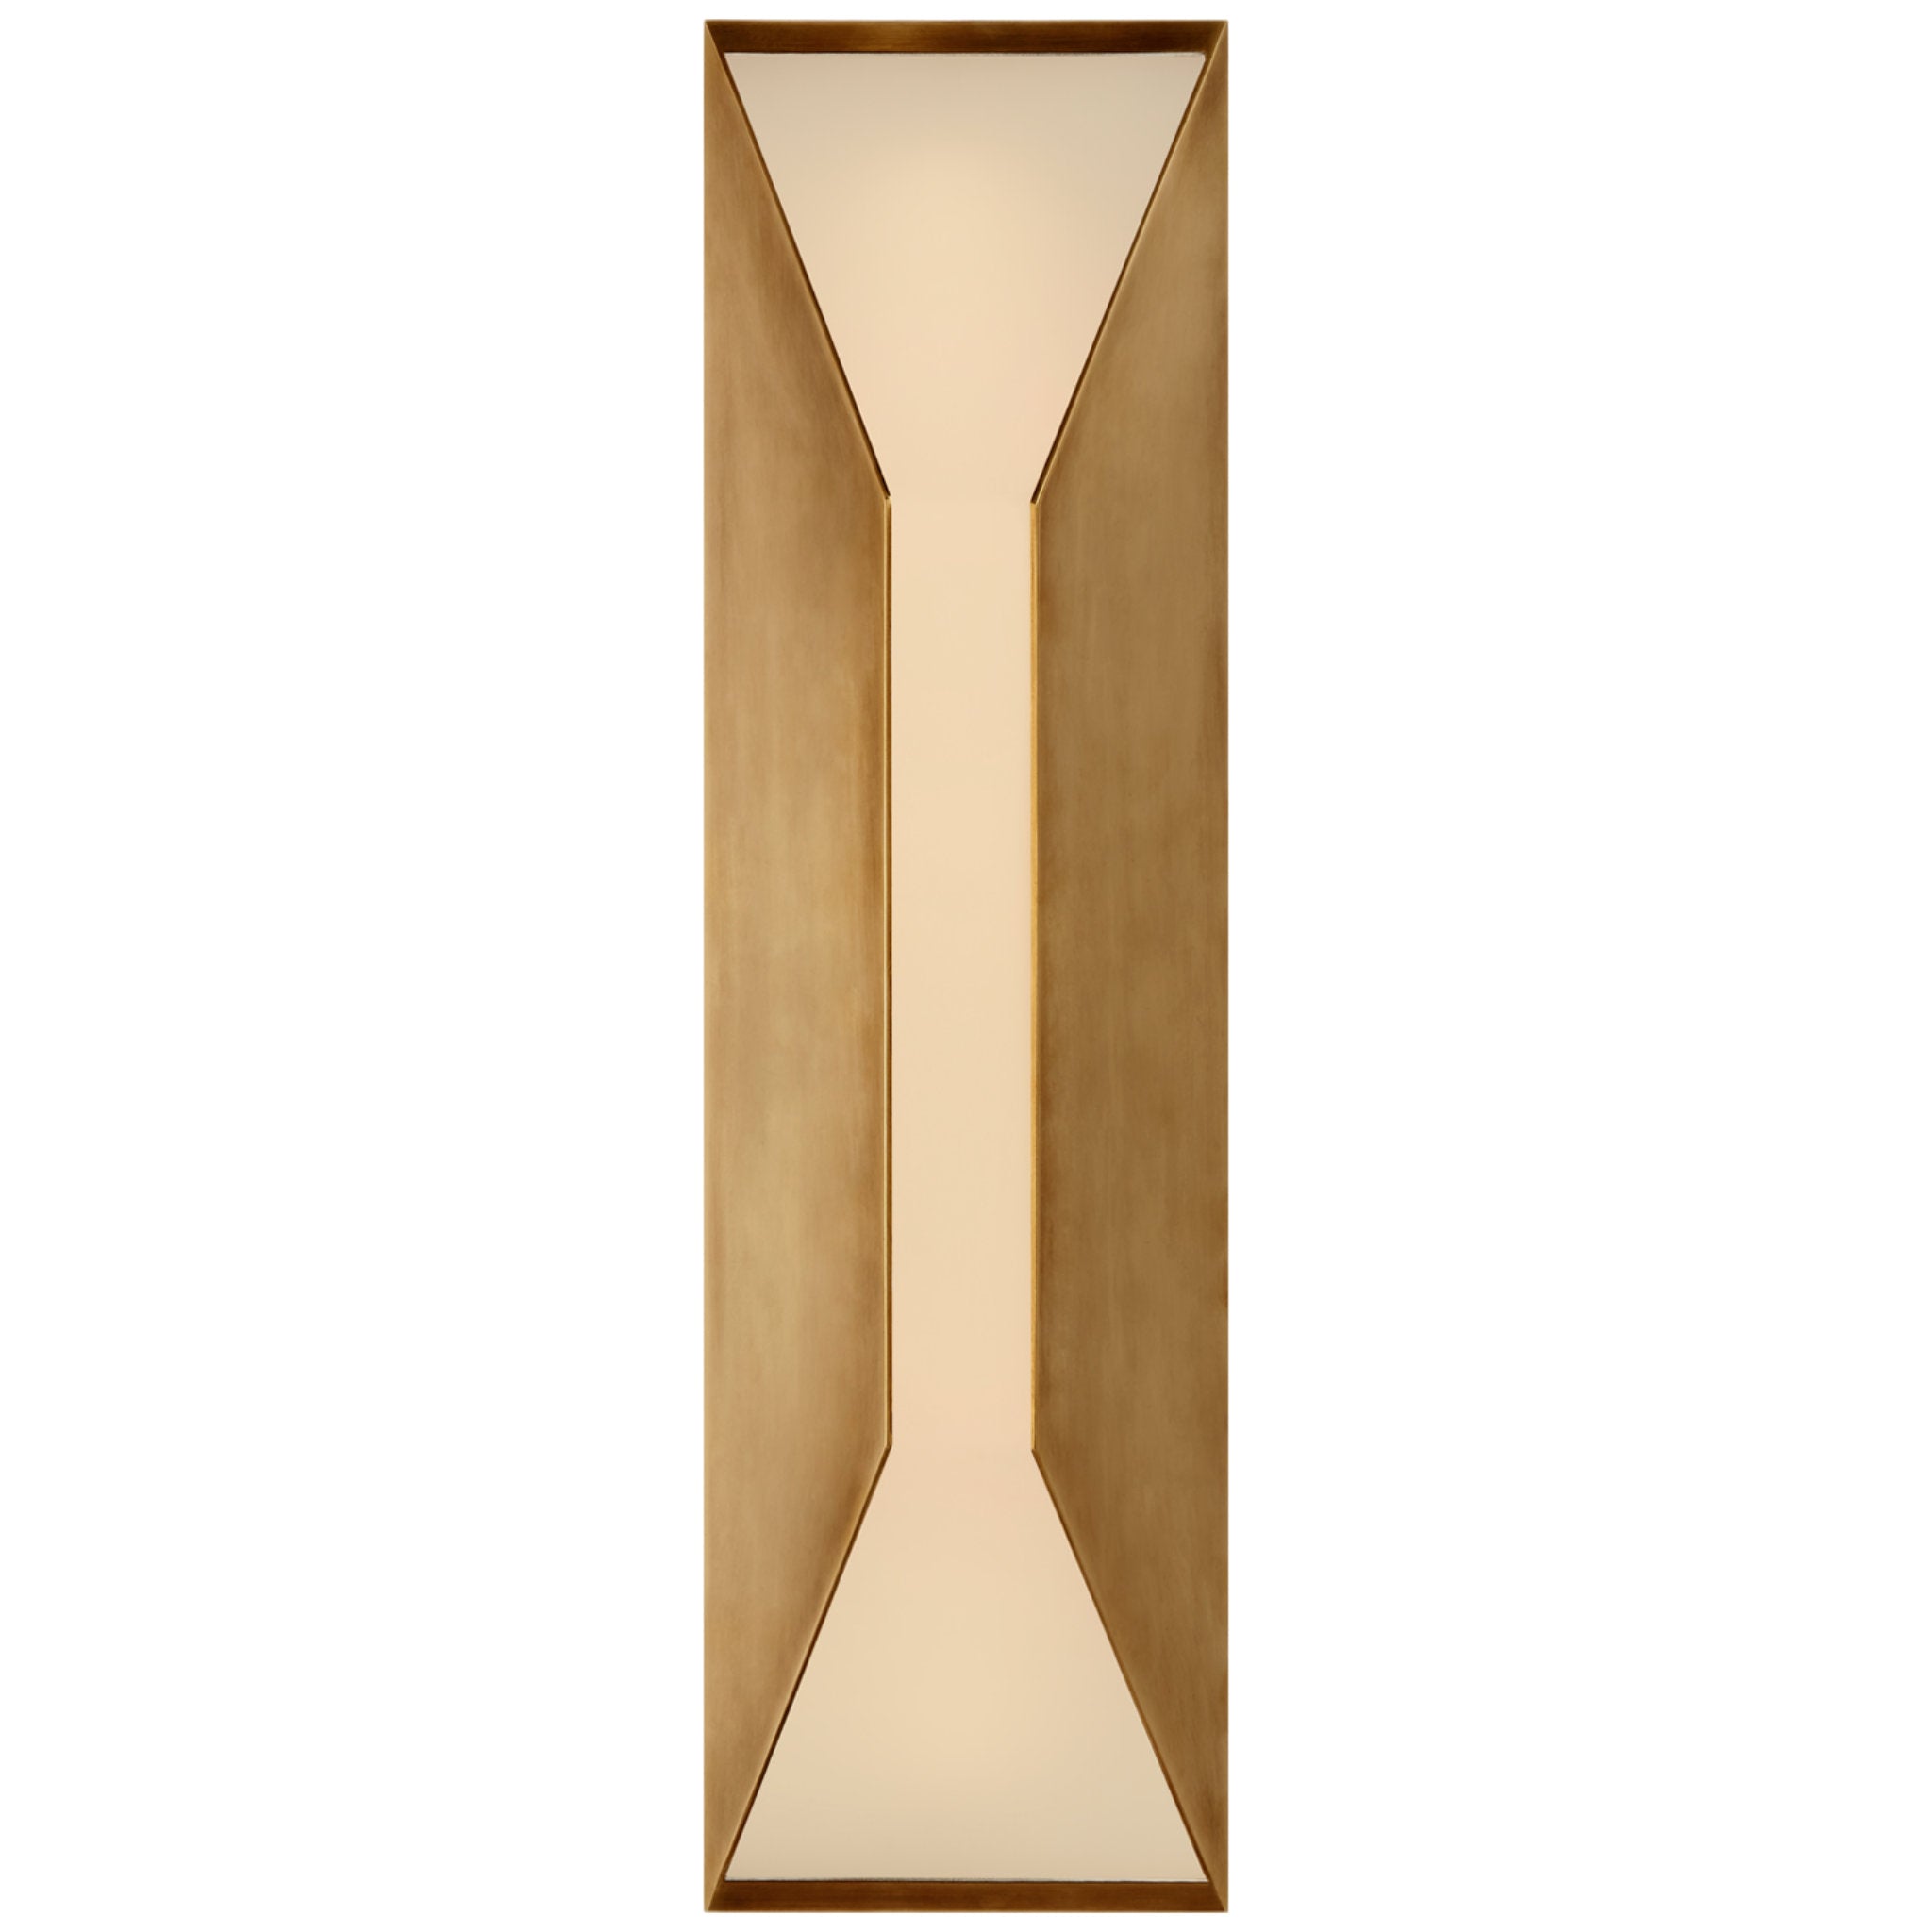 Kelly Wearstler Stretto 16" Sconce in Antique-Burnished Brass with Frosted Glass